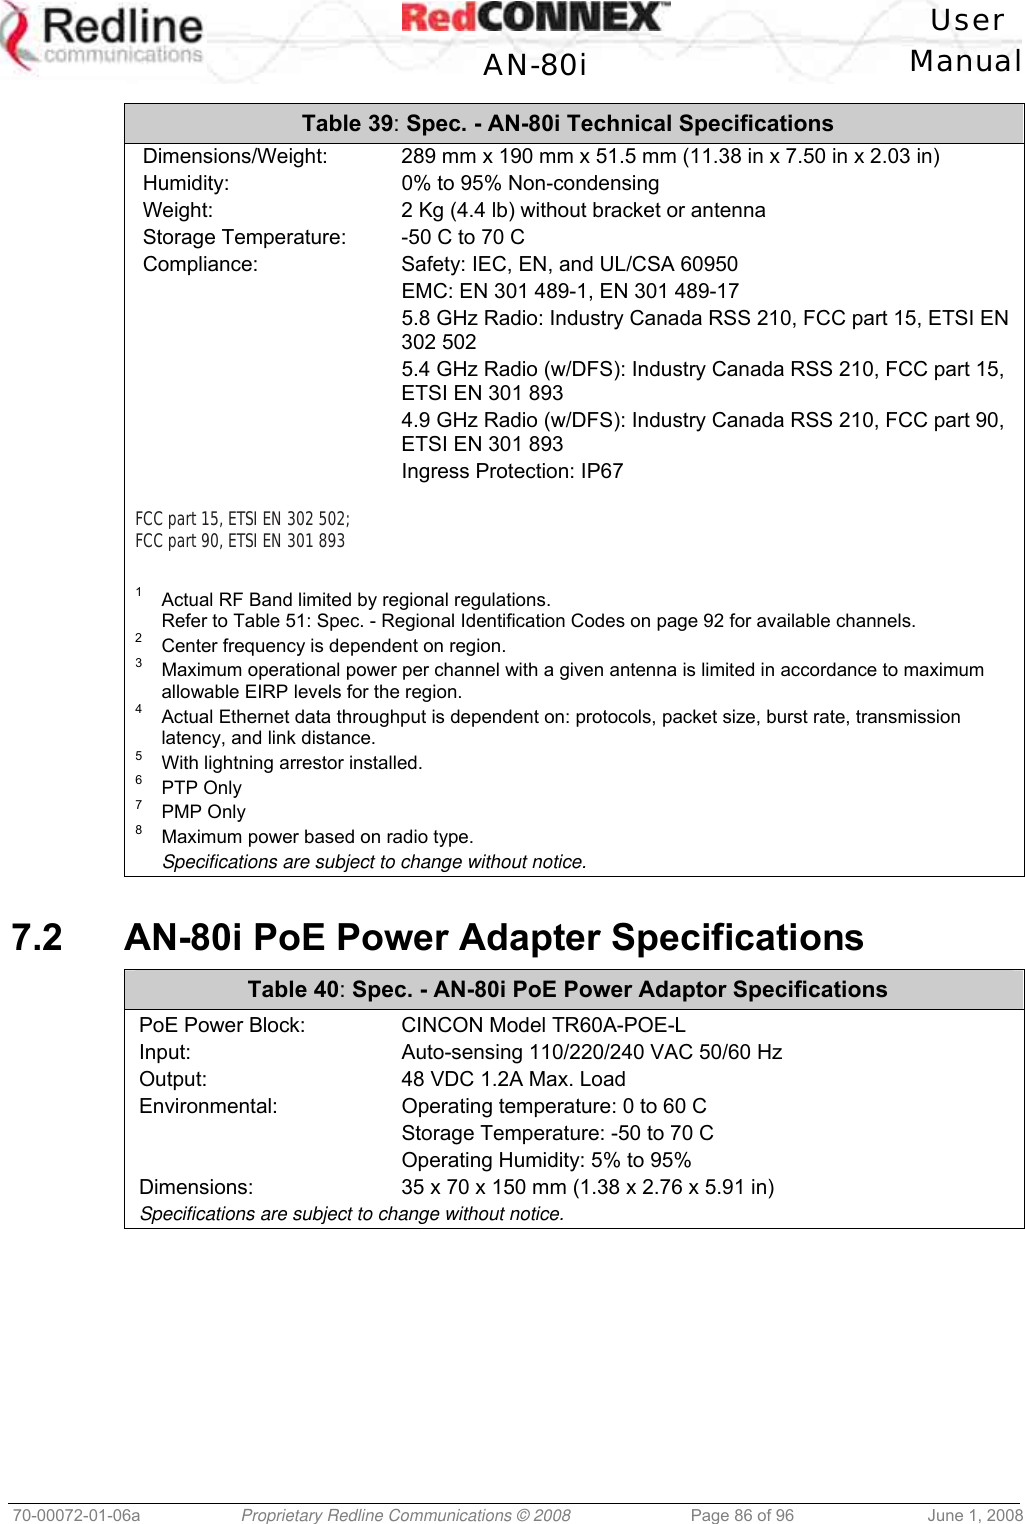   User  AN-80i Manual  70-00072-01-06a  Proprietary Redline Communications © 2008  Page 86 of 96  June 1, 2008 Table 39: Spec. - AN-80i Technical Specifications Dimensions/Weight:  289 mm x 190 mm x 51.5 mm (11.38 in x 7.50 in x 2.03 in) Humidity:  0% to 95% Non-condensing Weight:  2 Kg (4.4 lb) without bracket or antenna Storage Temperature:  -50 C to 70 C Compliance:  Safety: IEC, EN, and UL/CSA 60950   EMC: EN 301 489-1, EN 301 489-17   5.8 GHz Radio: Industry Canada RSS 210, FCC part 15, ETSI EN 302 502   5.4 GHz Radio (w/DFS): Industry Canada RSS 210, FCC part 15, ETSI EN 301 893   4.9 GHz Radio (w/DFS): Industry Canada RSS 210, FCC part 90, ETSI EN 301 893   Ingress Protection: IP67  FCC part 15, ETSI EN 302 502; FCC part 90, ETSI EN 301 893   1   Actual RF Band limited by regional regulations. Refer to Table 51: Spec. - Regional Identification Codes on page 92 for available channels. 2   Center frequency is dependent on region. 3   Maximum operational power per channel with a given antenna is limited in accordance to maximum allowable EIRP levels for the region. 4   Actual Ethernet data throughput is dependent on: protocols, packet size, burst rate, transmission latency, and link distance. 5   With lightning arrestor installed. 6   PTP Only 7   PMP Only 8   Maximum power based on radio type.  Specifications are subject to change without notice.  7.2  AN-80i PoE Power Adapter Specifications  Table 40: Spec. - AN-80i PoE Power Adaptor Specifications PoE Power Block:  CINCON Model TR60A-POE-L Input:  Auto-sensing 110/220/240 VAC 50/60 Hz Output:  48 VDC 1.2A Max. Load Environmental:  Operating temperature: 0 to 60 C   Storage Temperature: -50 to 70 C   Operating Humidity: 5% to 95%  Dimensions:  35 x 70 x 150 mm (1.38 x 2.76 x 5.91 in) Specifications are subject to change without notice.  